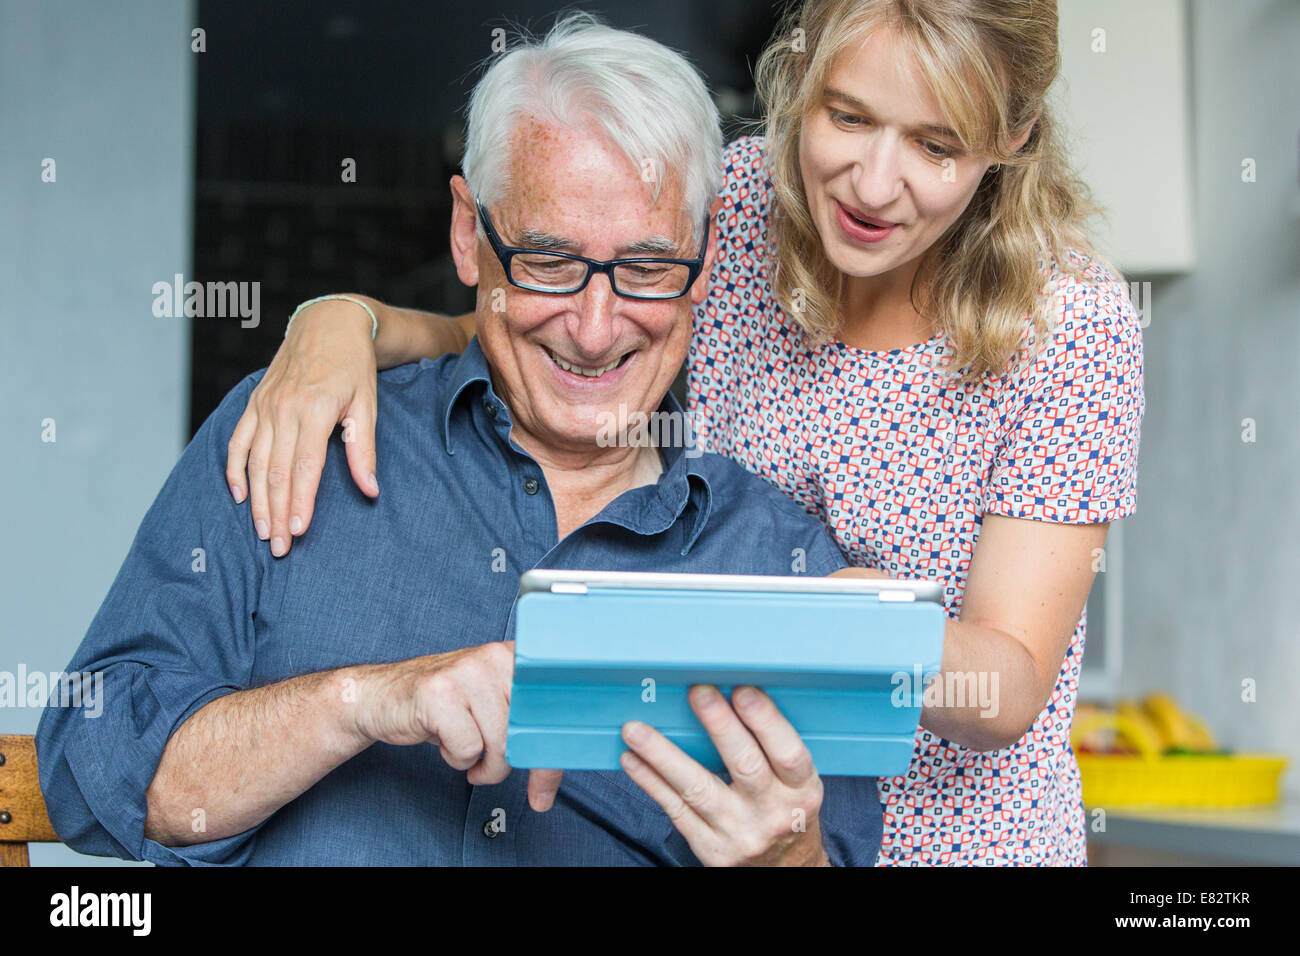 Woman helping senior to use a digital tablet. Stock Photo